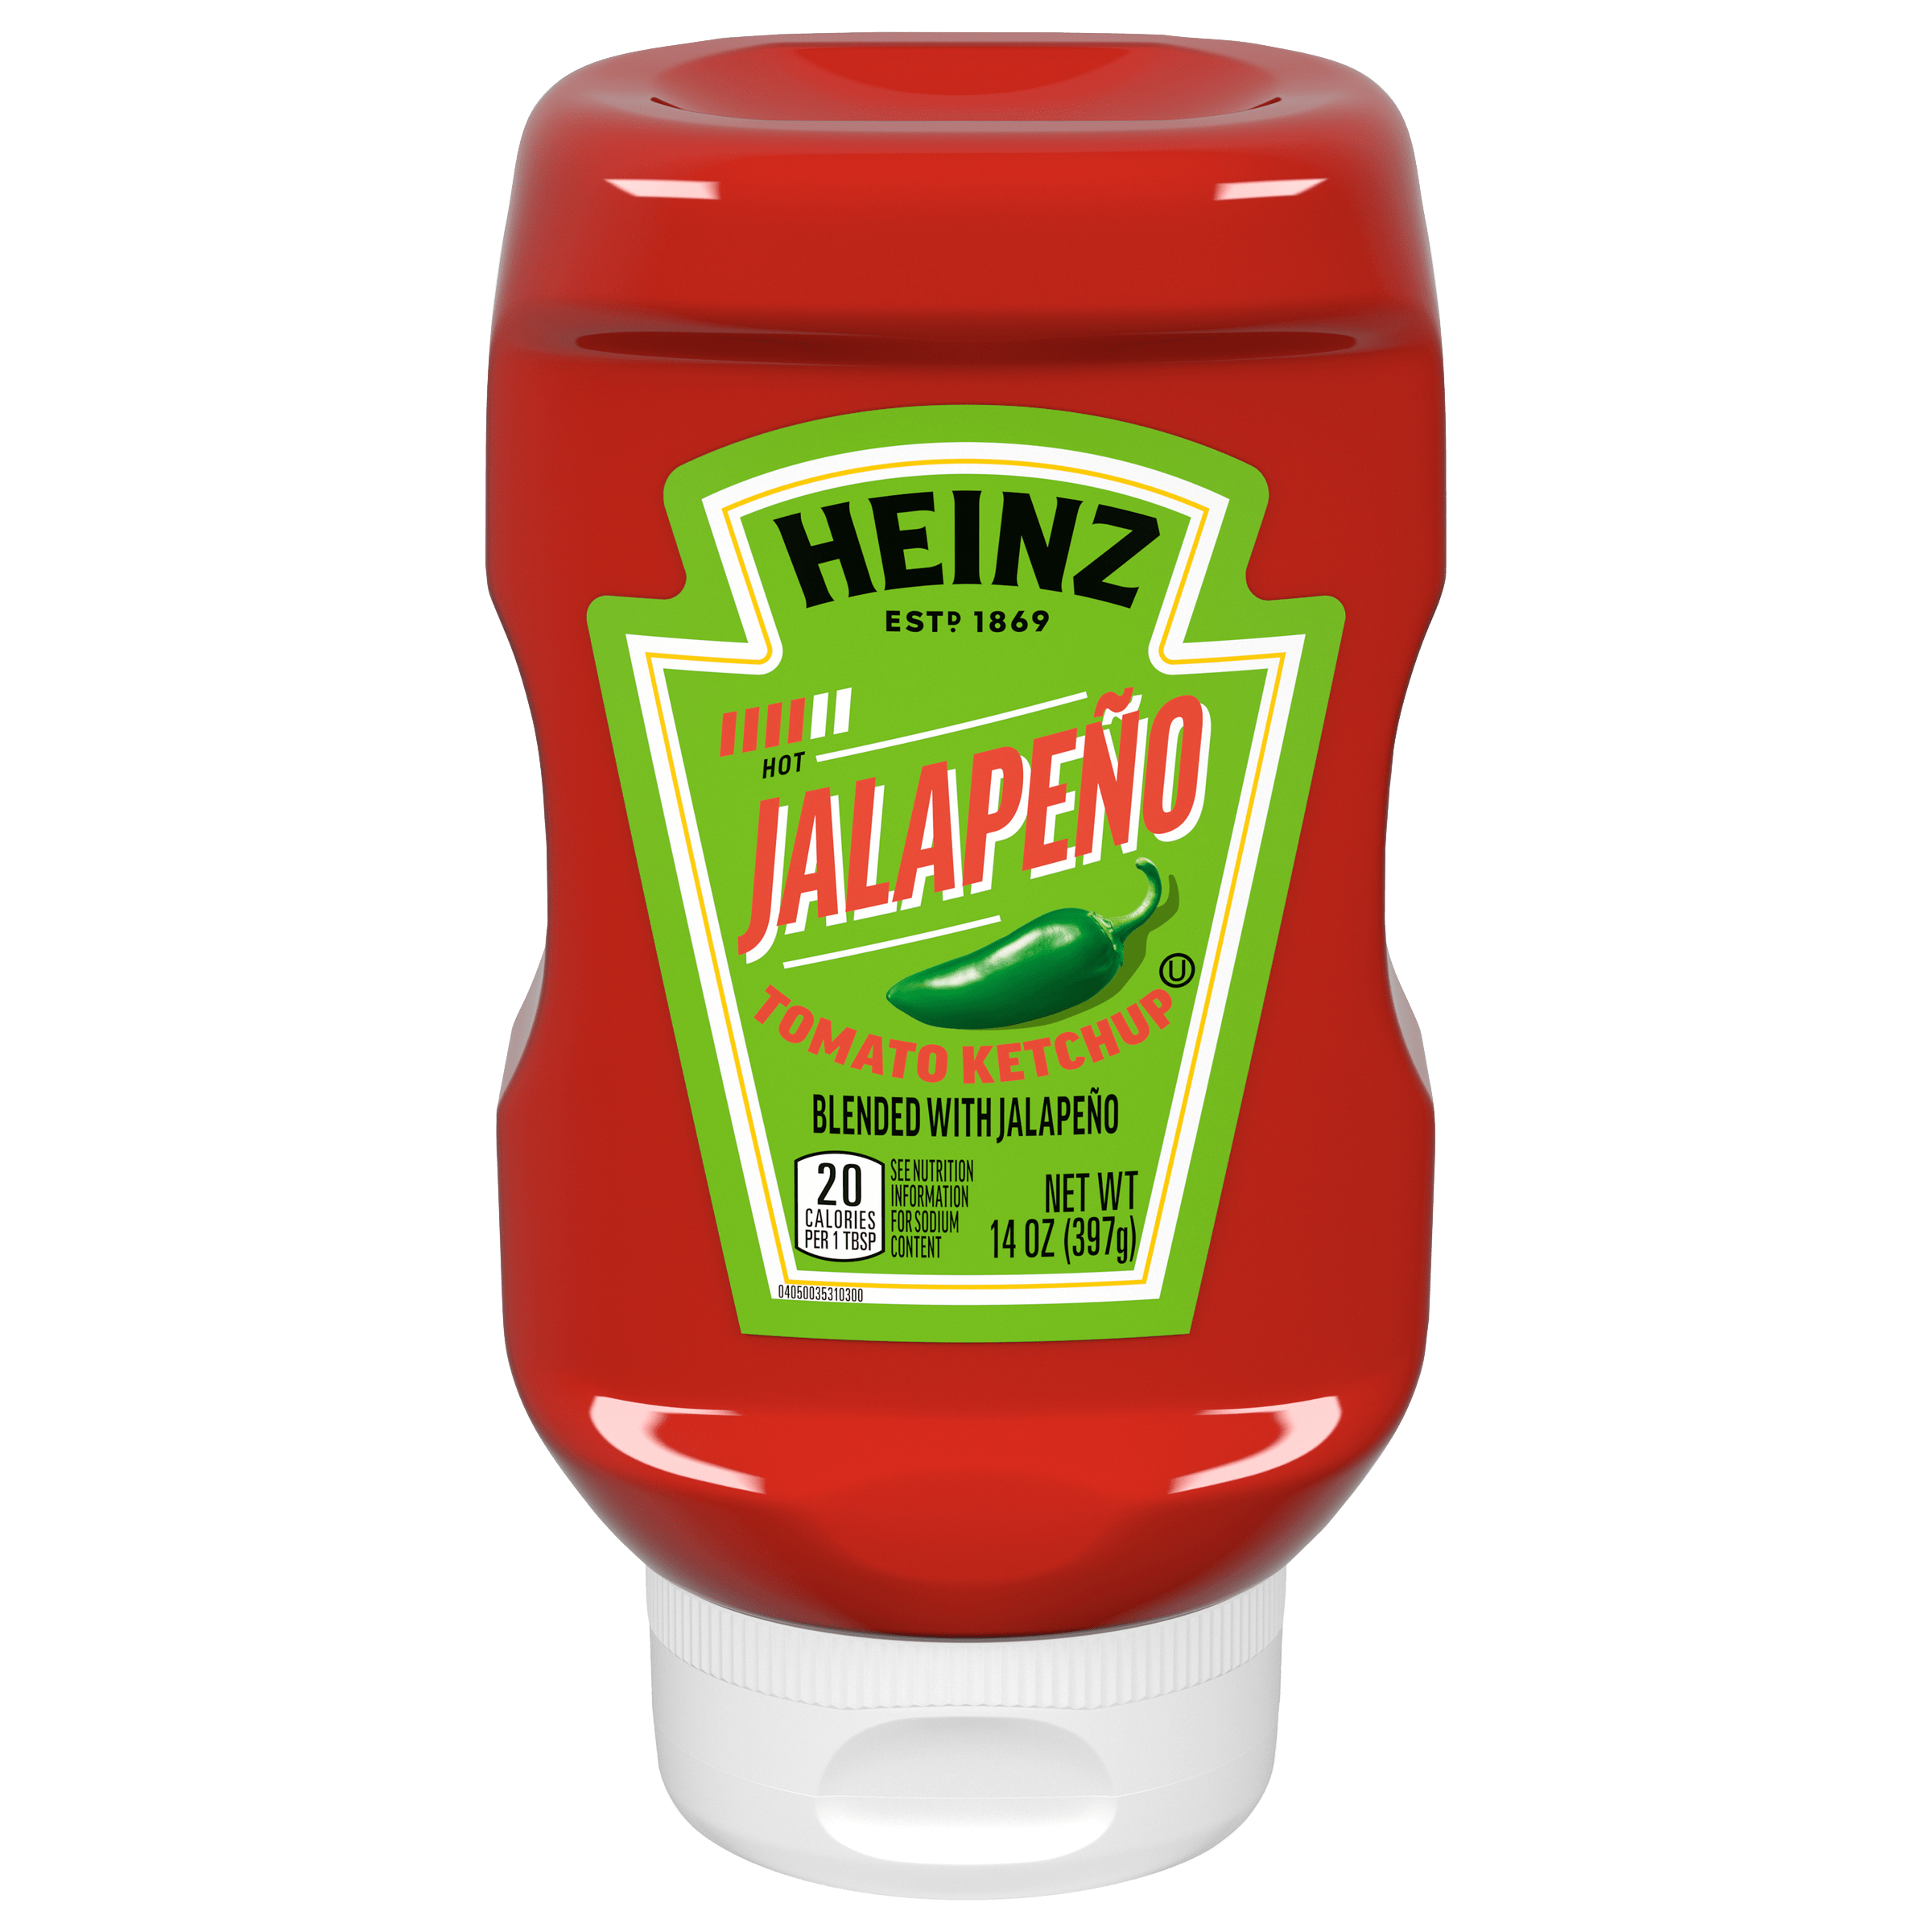 Tomato Ketchup Blended with Jalapeno